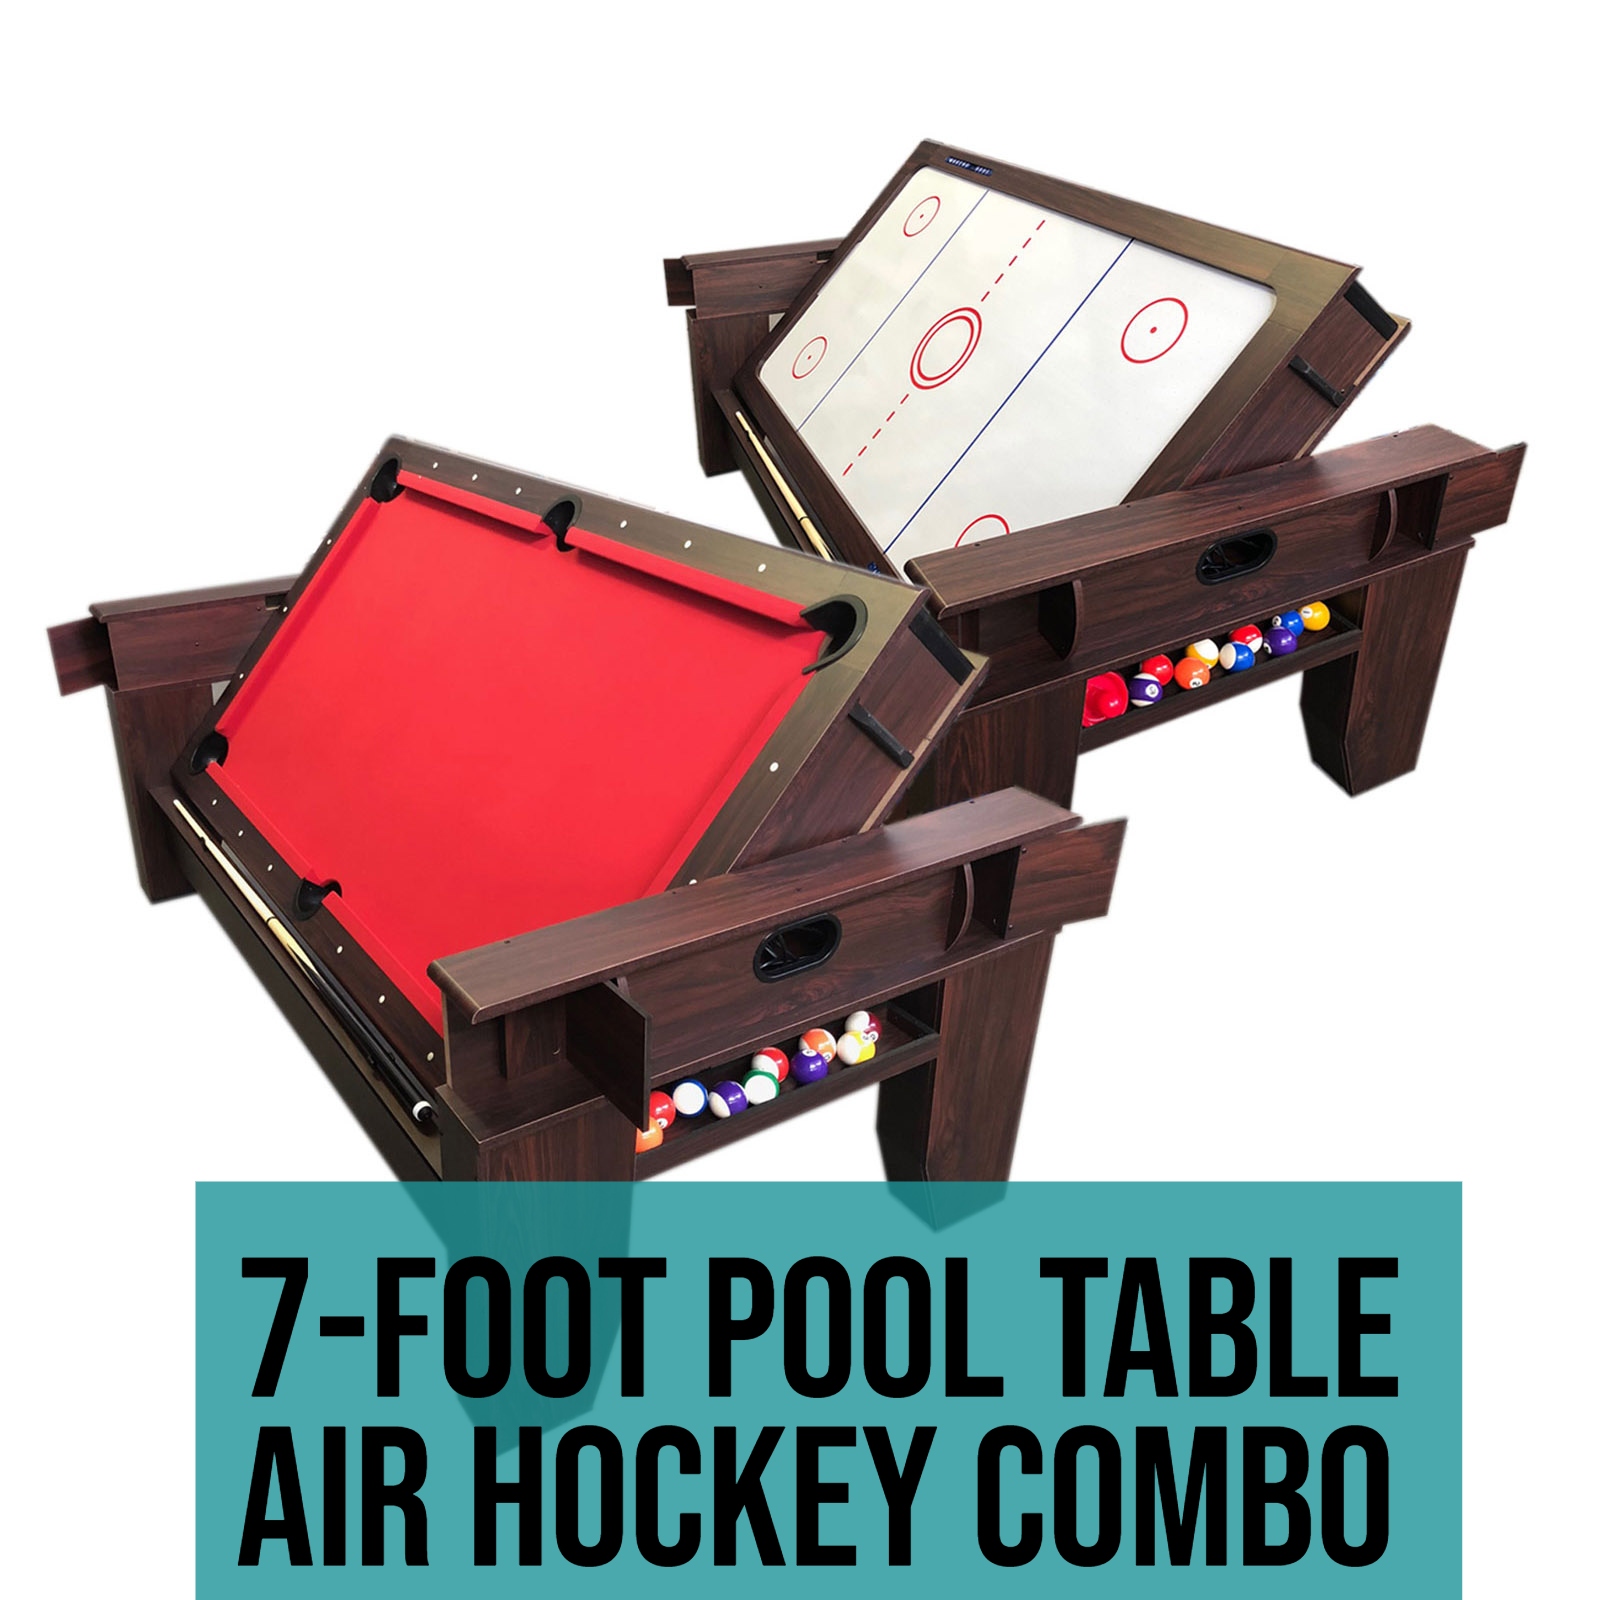 7-foot Pool Table Air Hockey Combo - Double The Entertainment